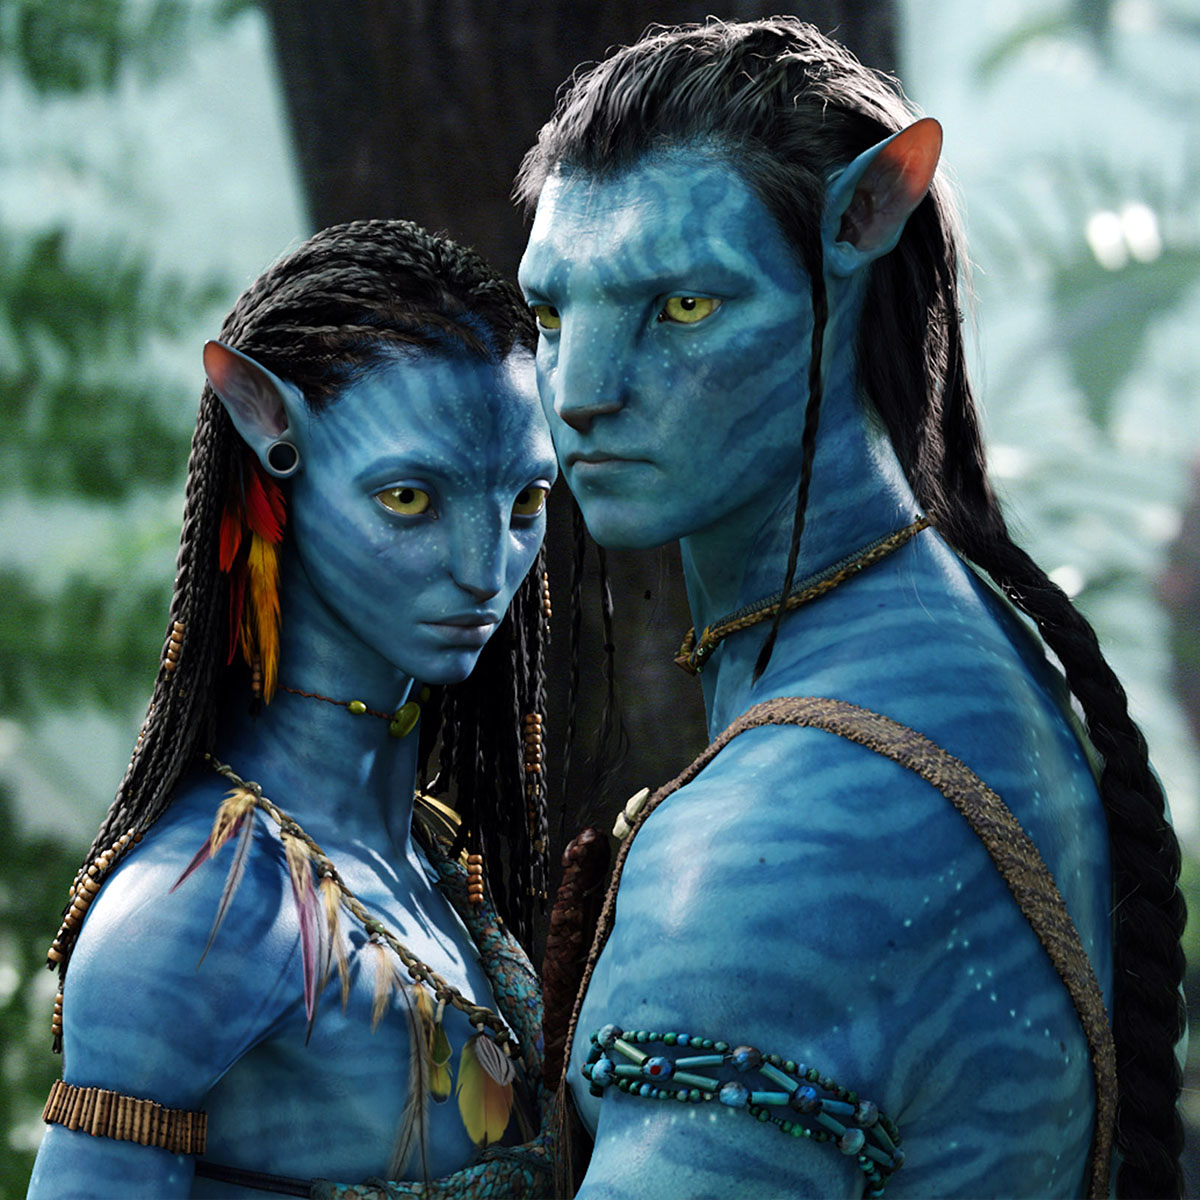 Your First Look at the Highly Anticipated Avatar Sequel